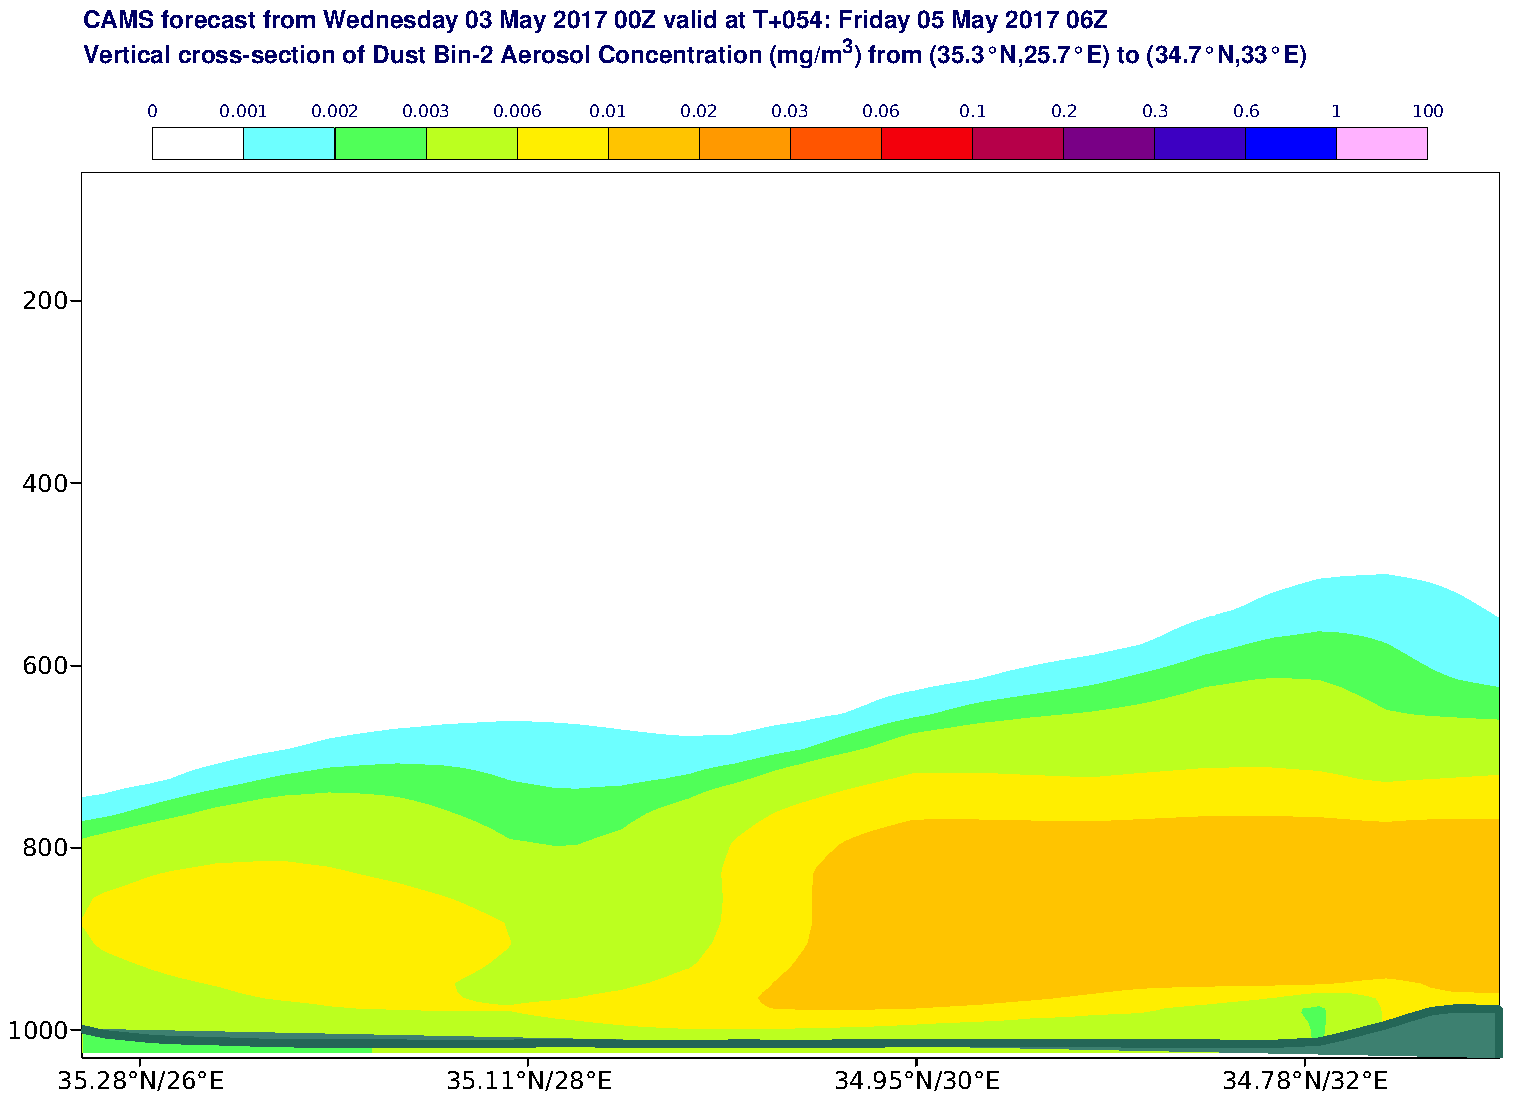 Vertical cross-section of Dust Bin-2 Aerosol Concentration (mg/m3) valid at T54 - 2017-05-05 06:00